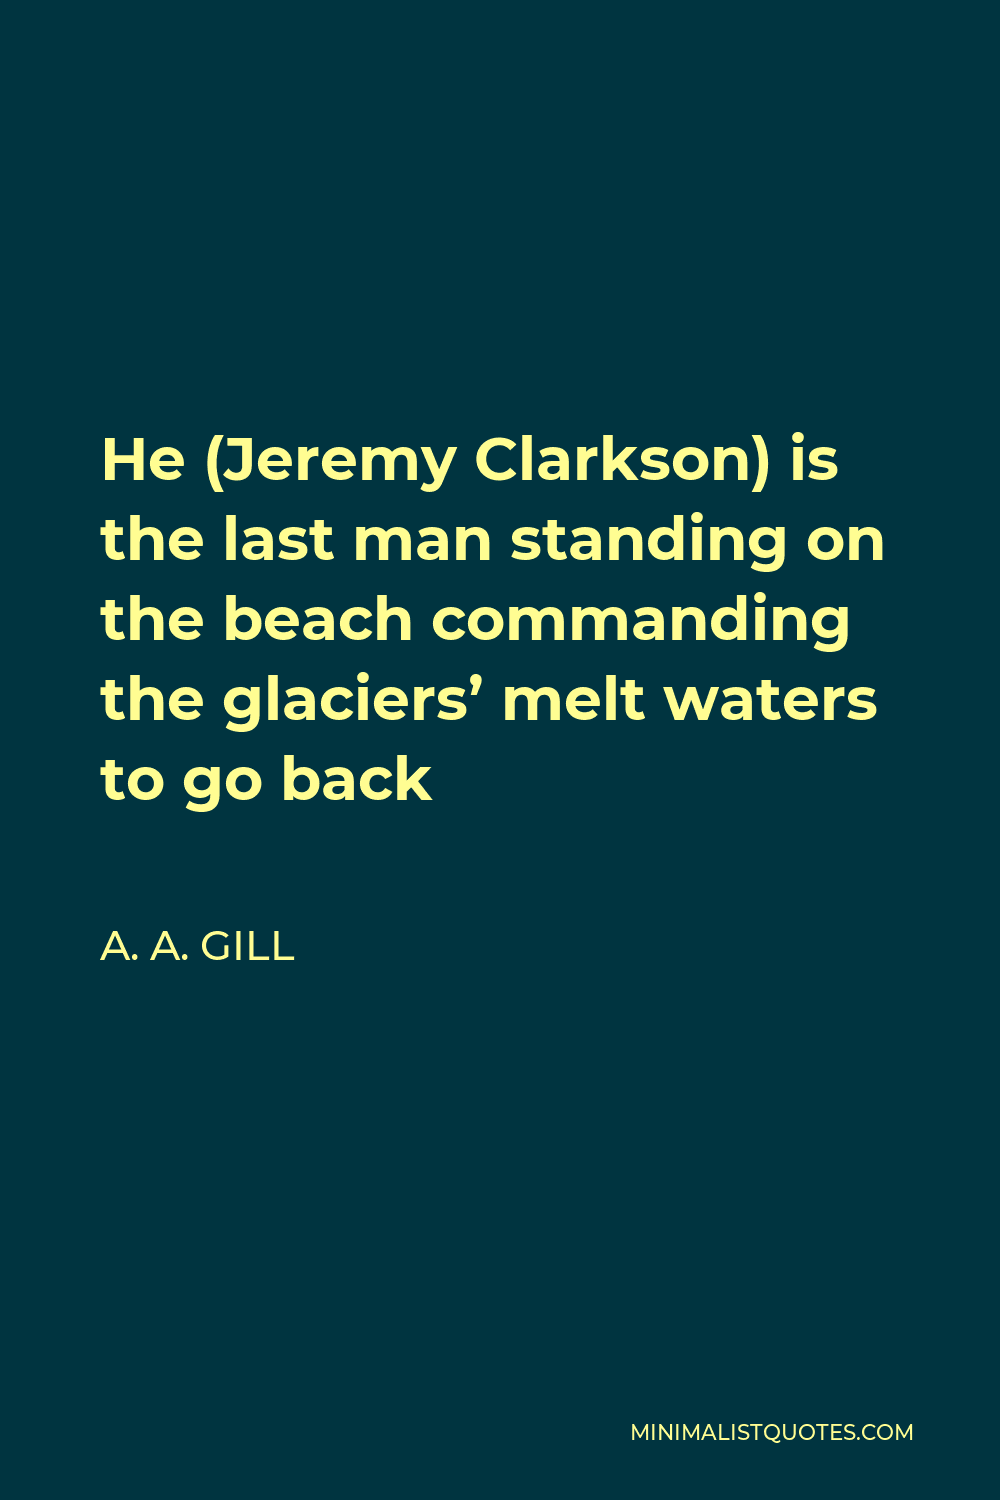 A. A. Gill Quote - He (Jeremy Clarkson) is the last man standing on the beach commanding the glaciers’ melt waters to go back